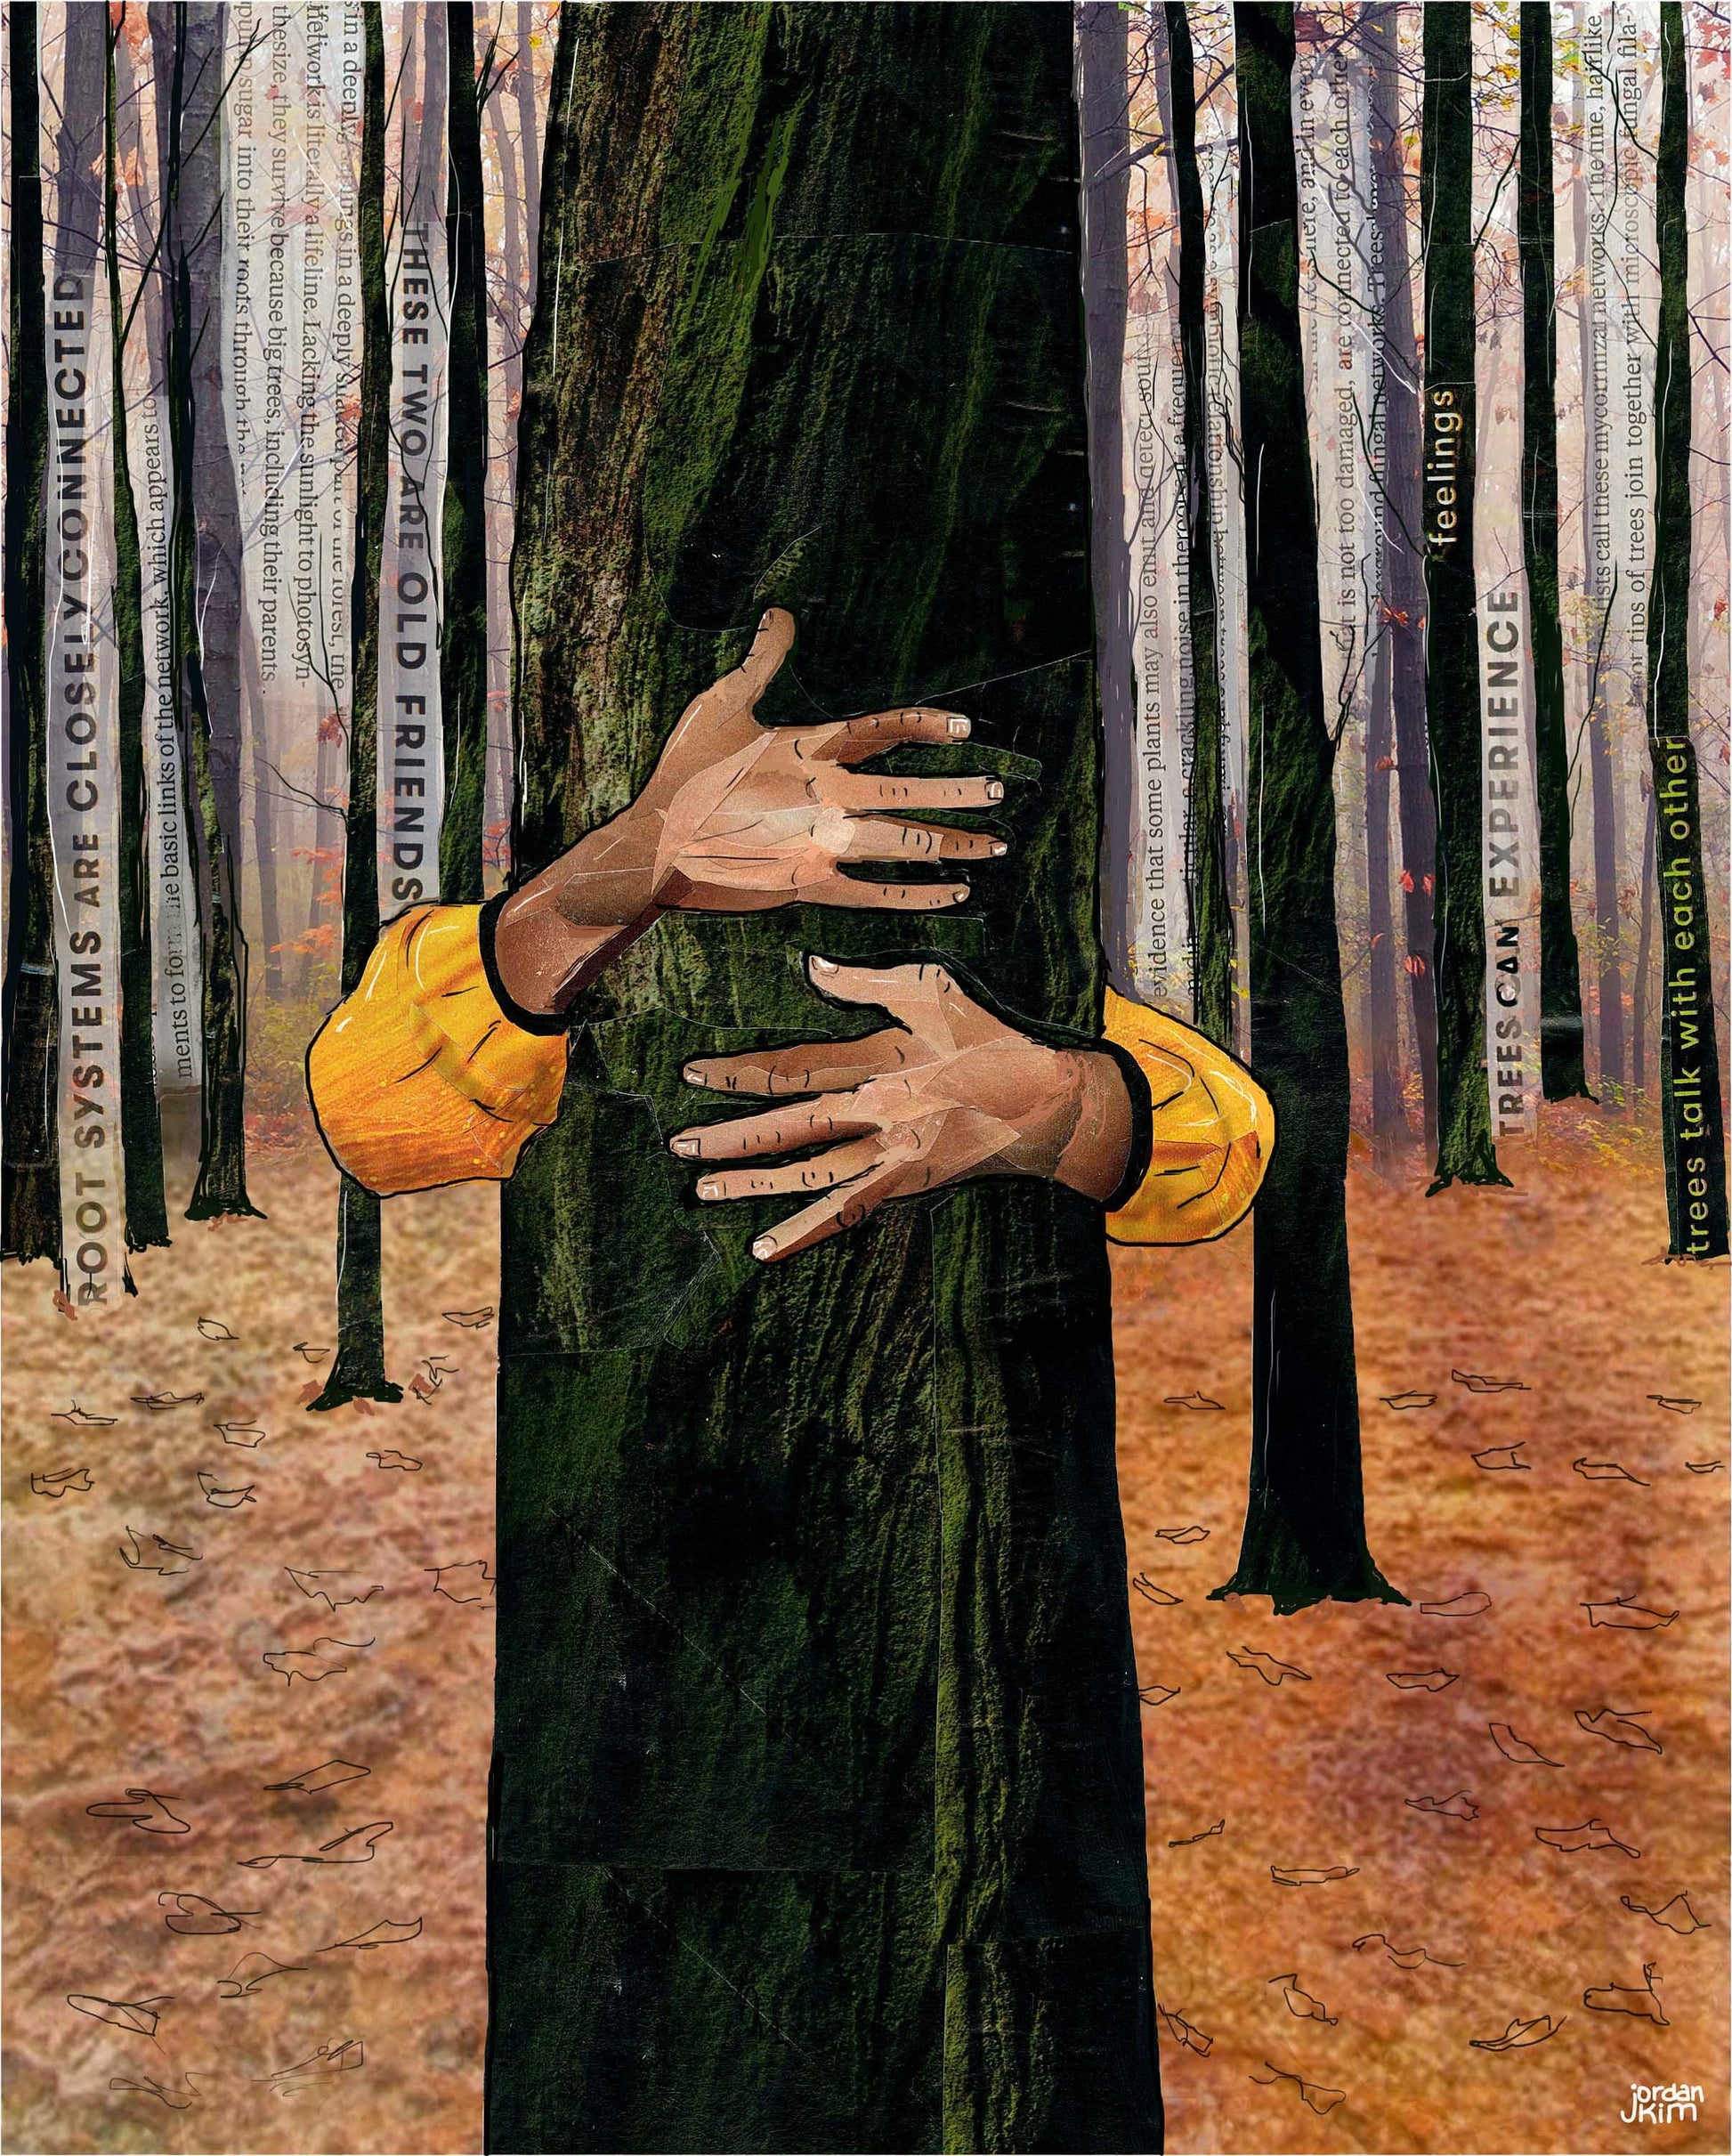 8x10 Art print of a Paper Collage of a person hugging a tree, tree hugger, hands, forest, nature, pandemic art, connection - Wall Art